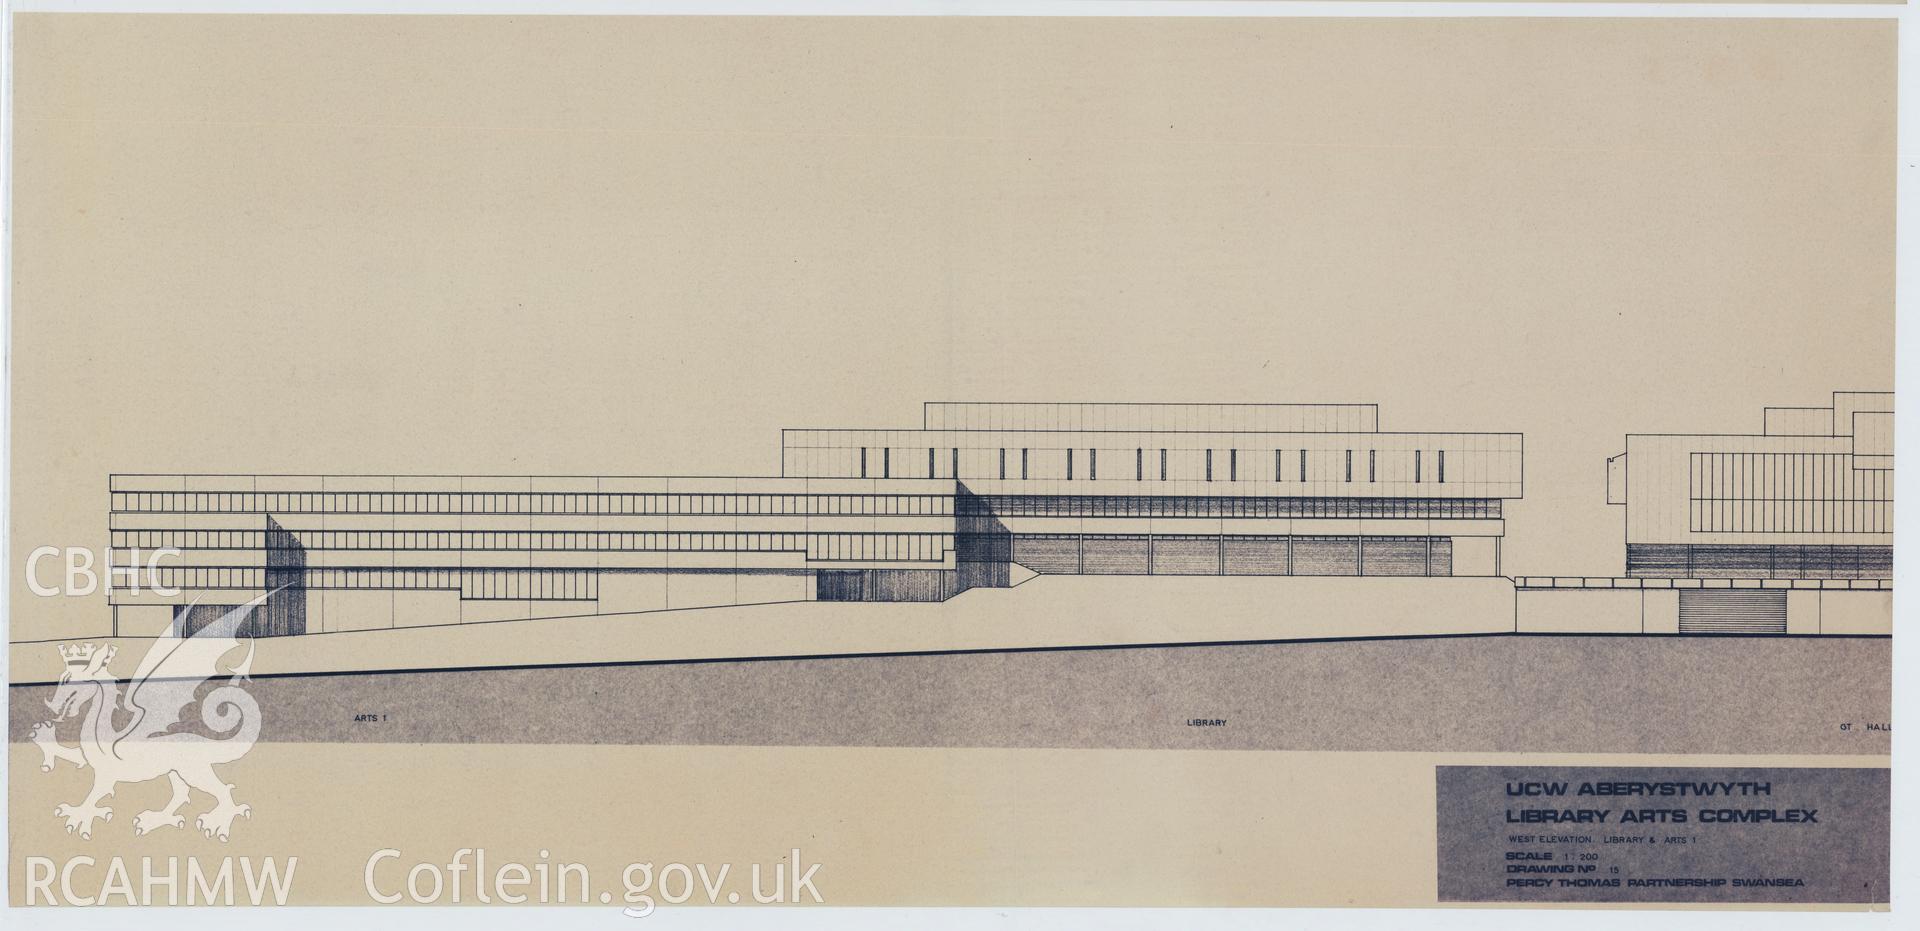 Digital copy of Drawing No 15, West Elevation Library and Arts 1 of the proposed Library Arts Complex at University College Aberystwyth, produced by Percy Thomas Partnership. Scale 1:200.